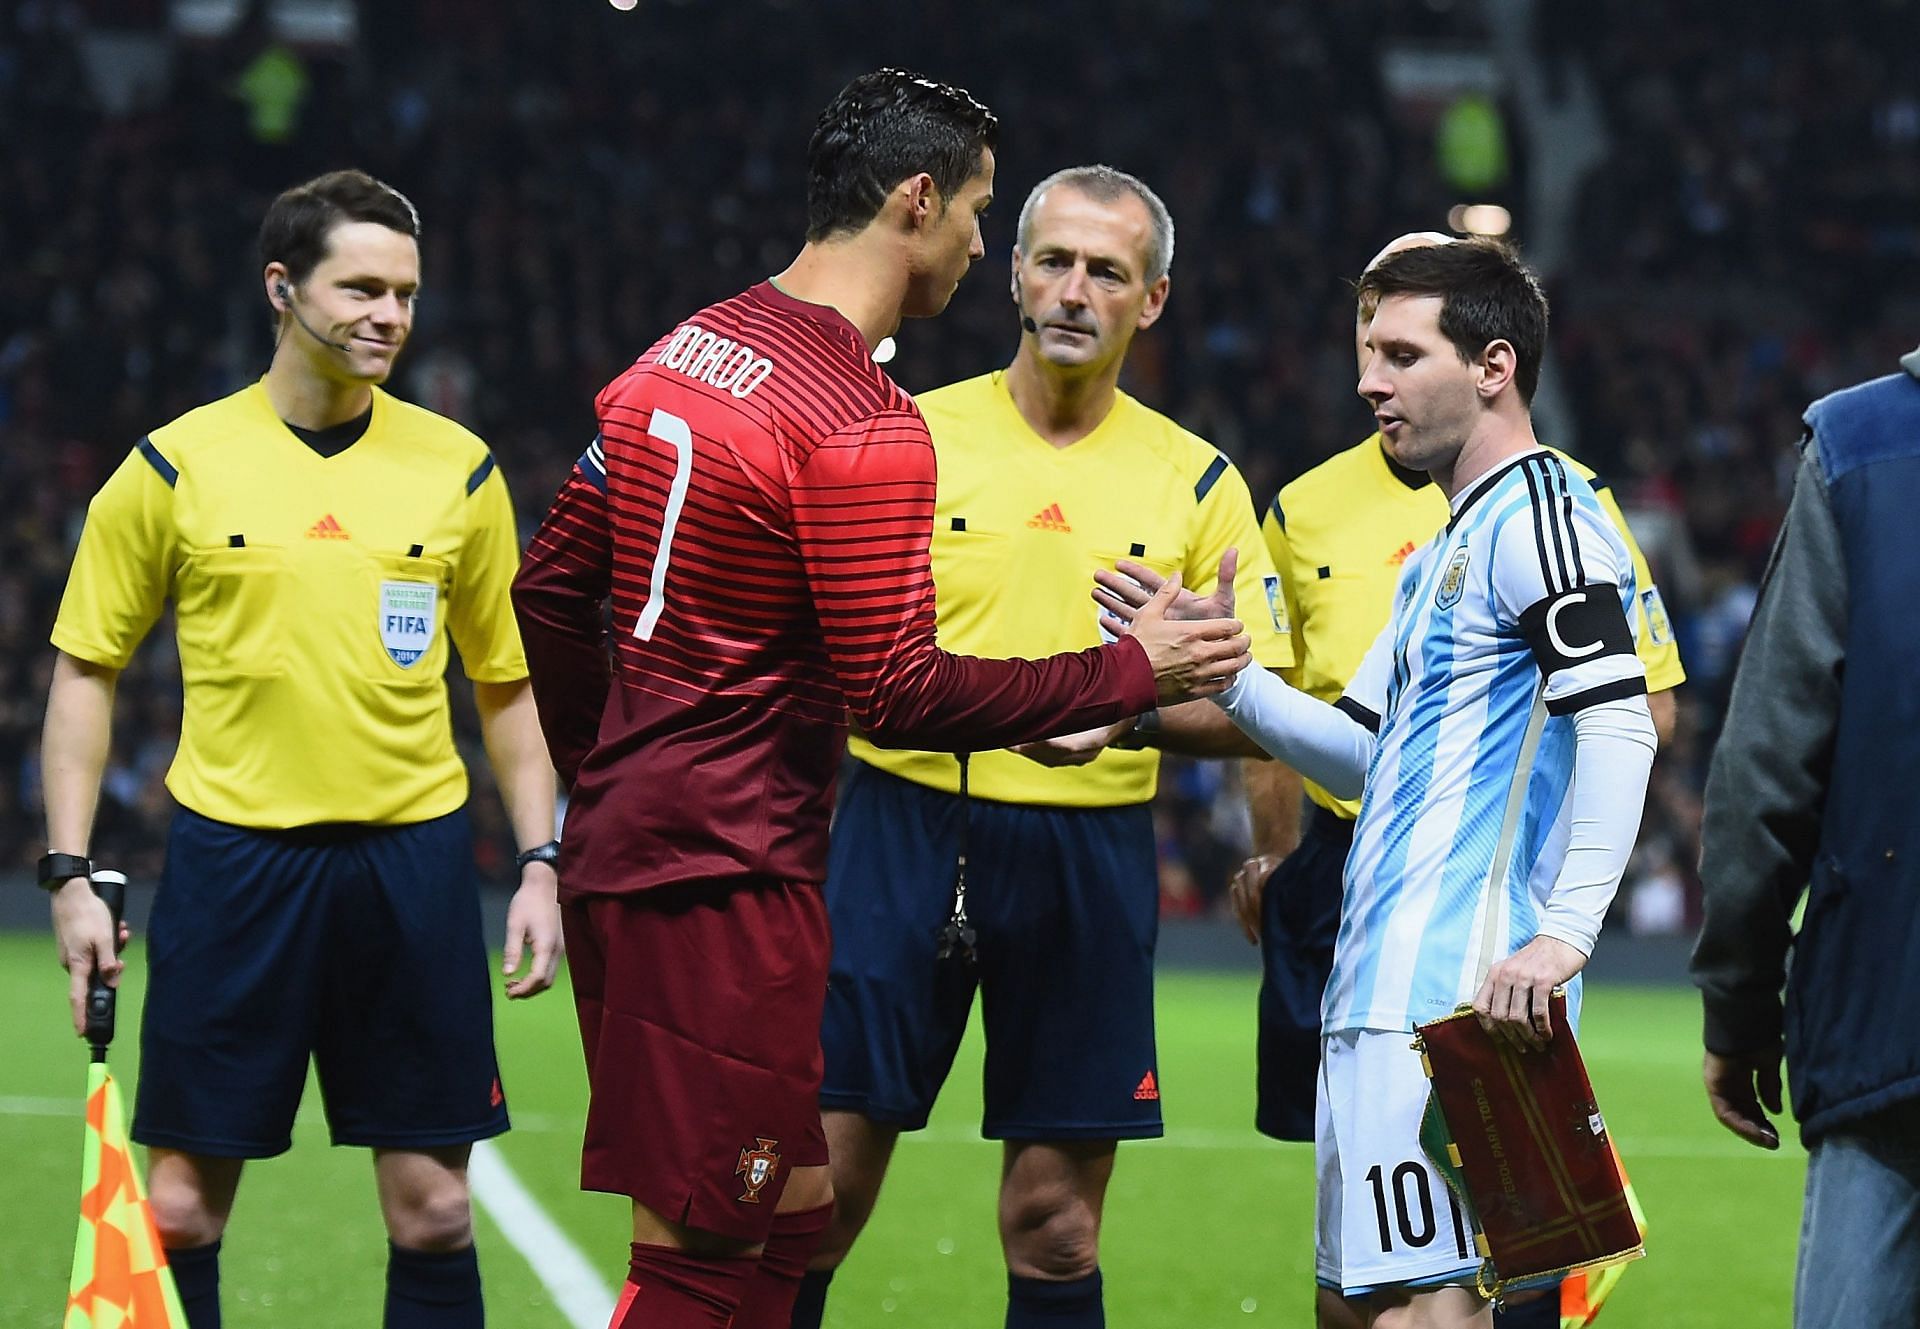 Lionel Messi and Cristiano Ronaldo captained their respective countries in a friendly meeting